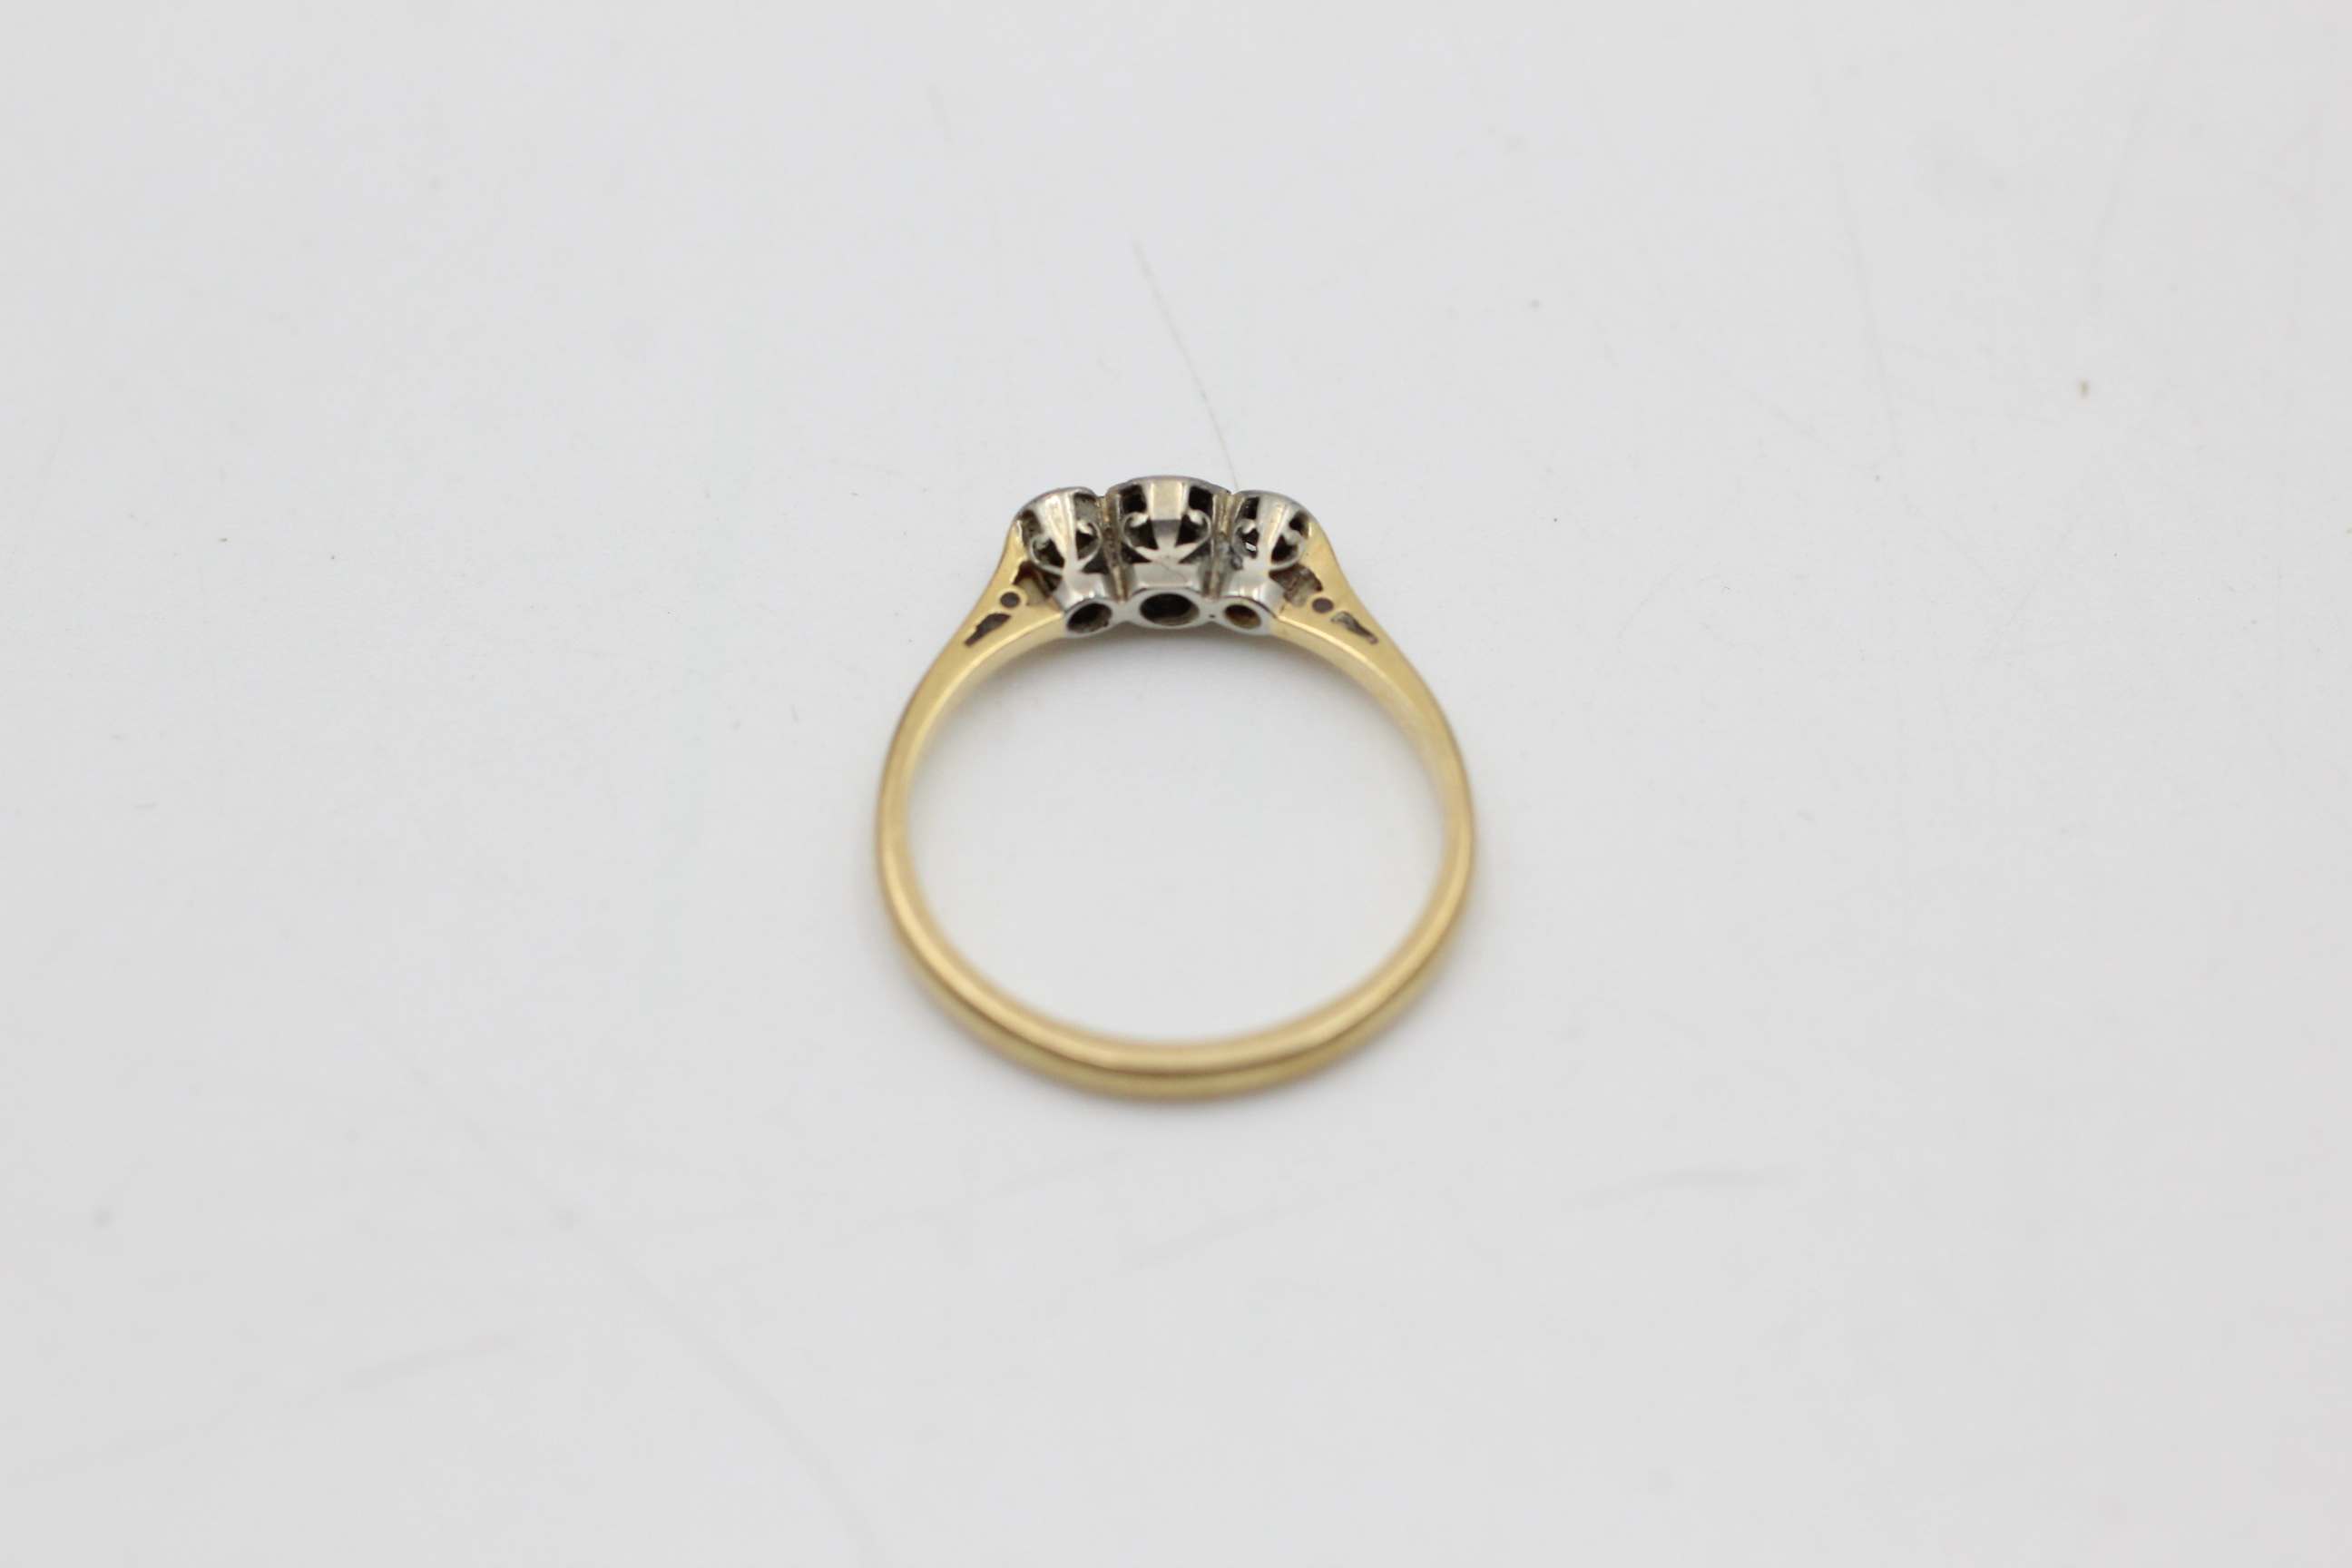 18ct gold antique diamond trilogy ring (2g) - Image 3 of 4